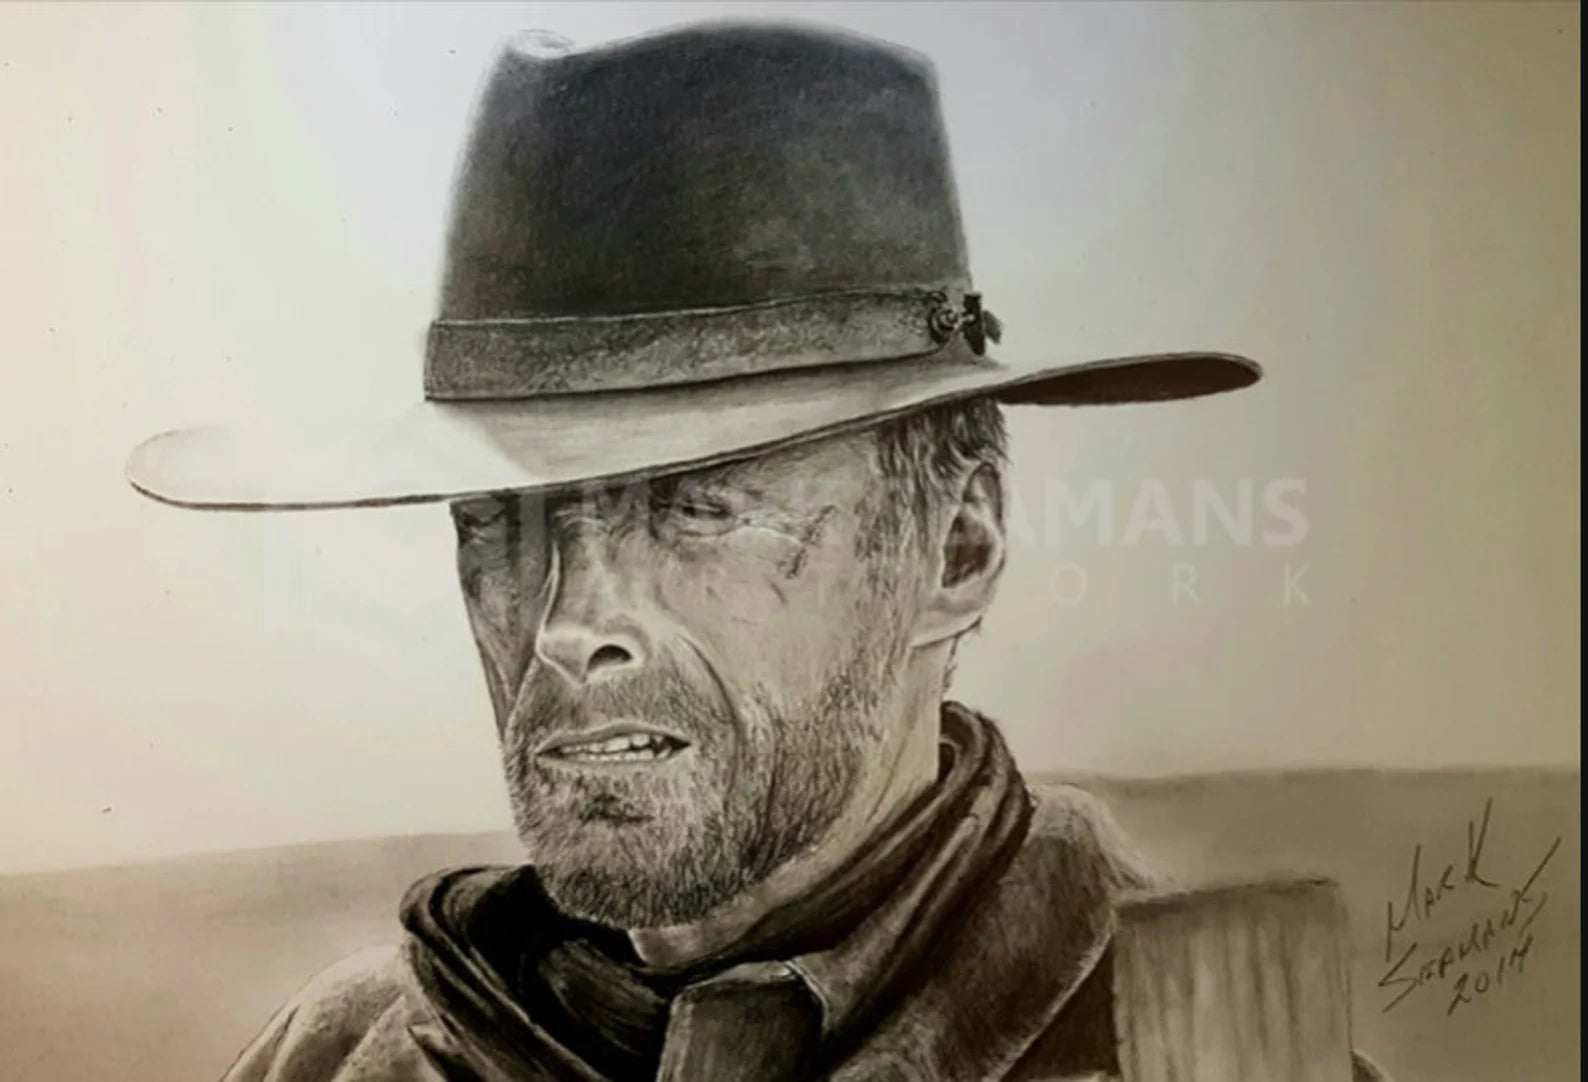 Clint Eastwood Charcoal Portrait – Gallery Wrapped Canvas